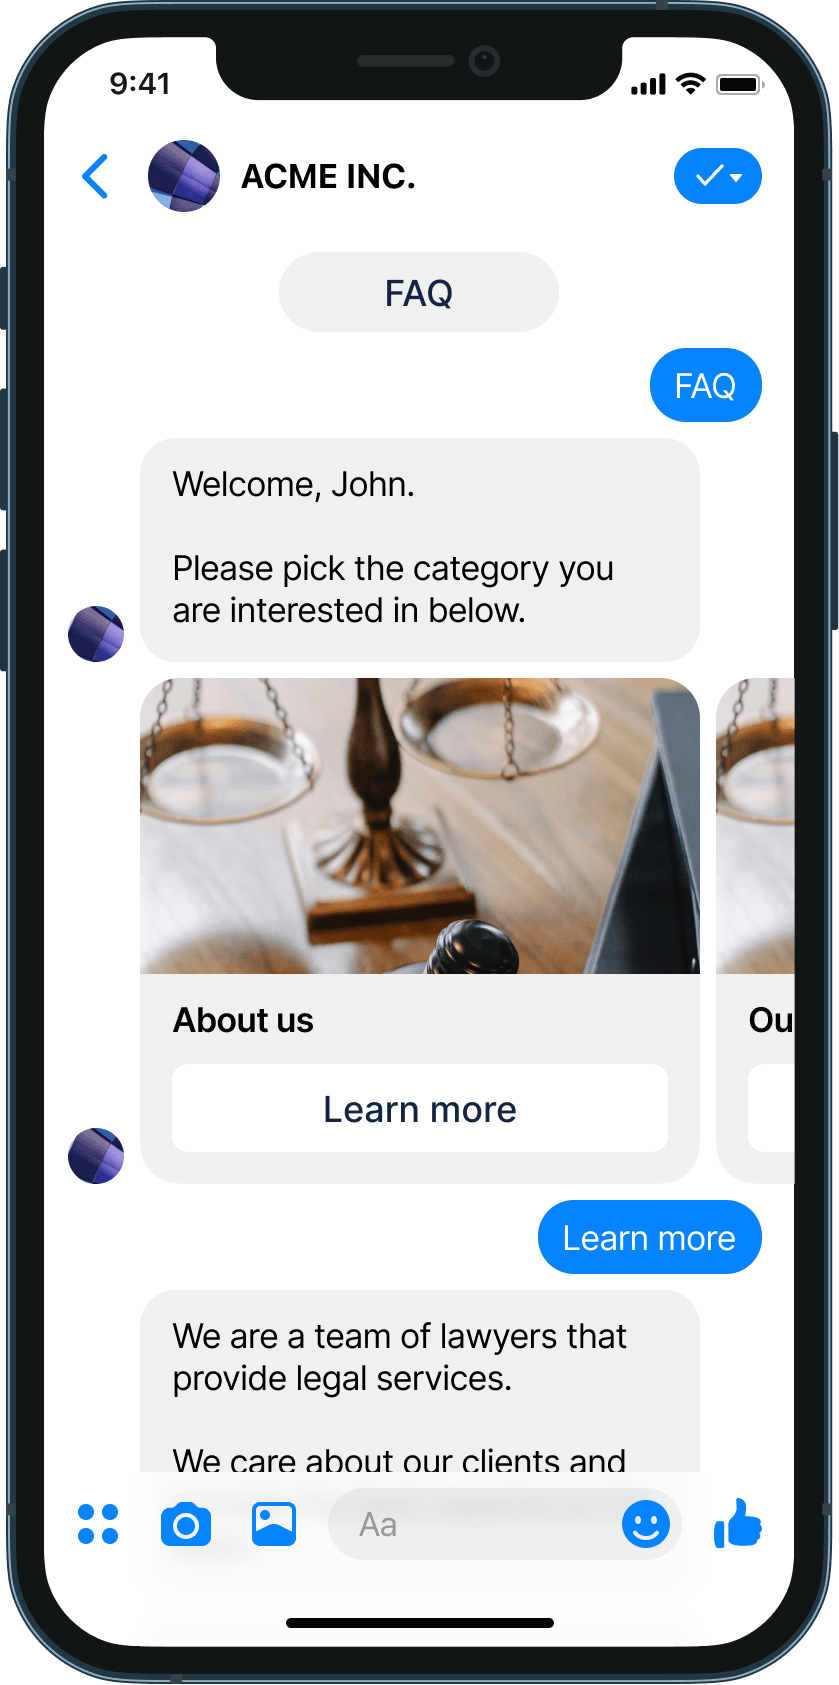 FAQ for lawyers chatbot example